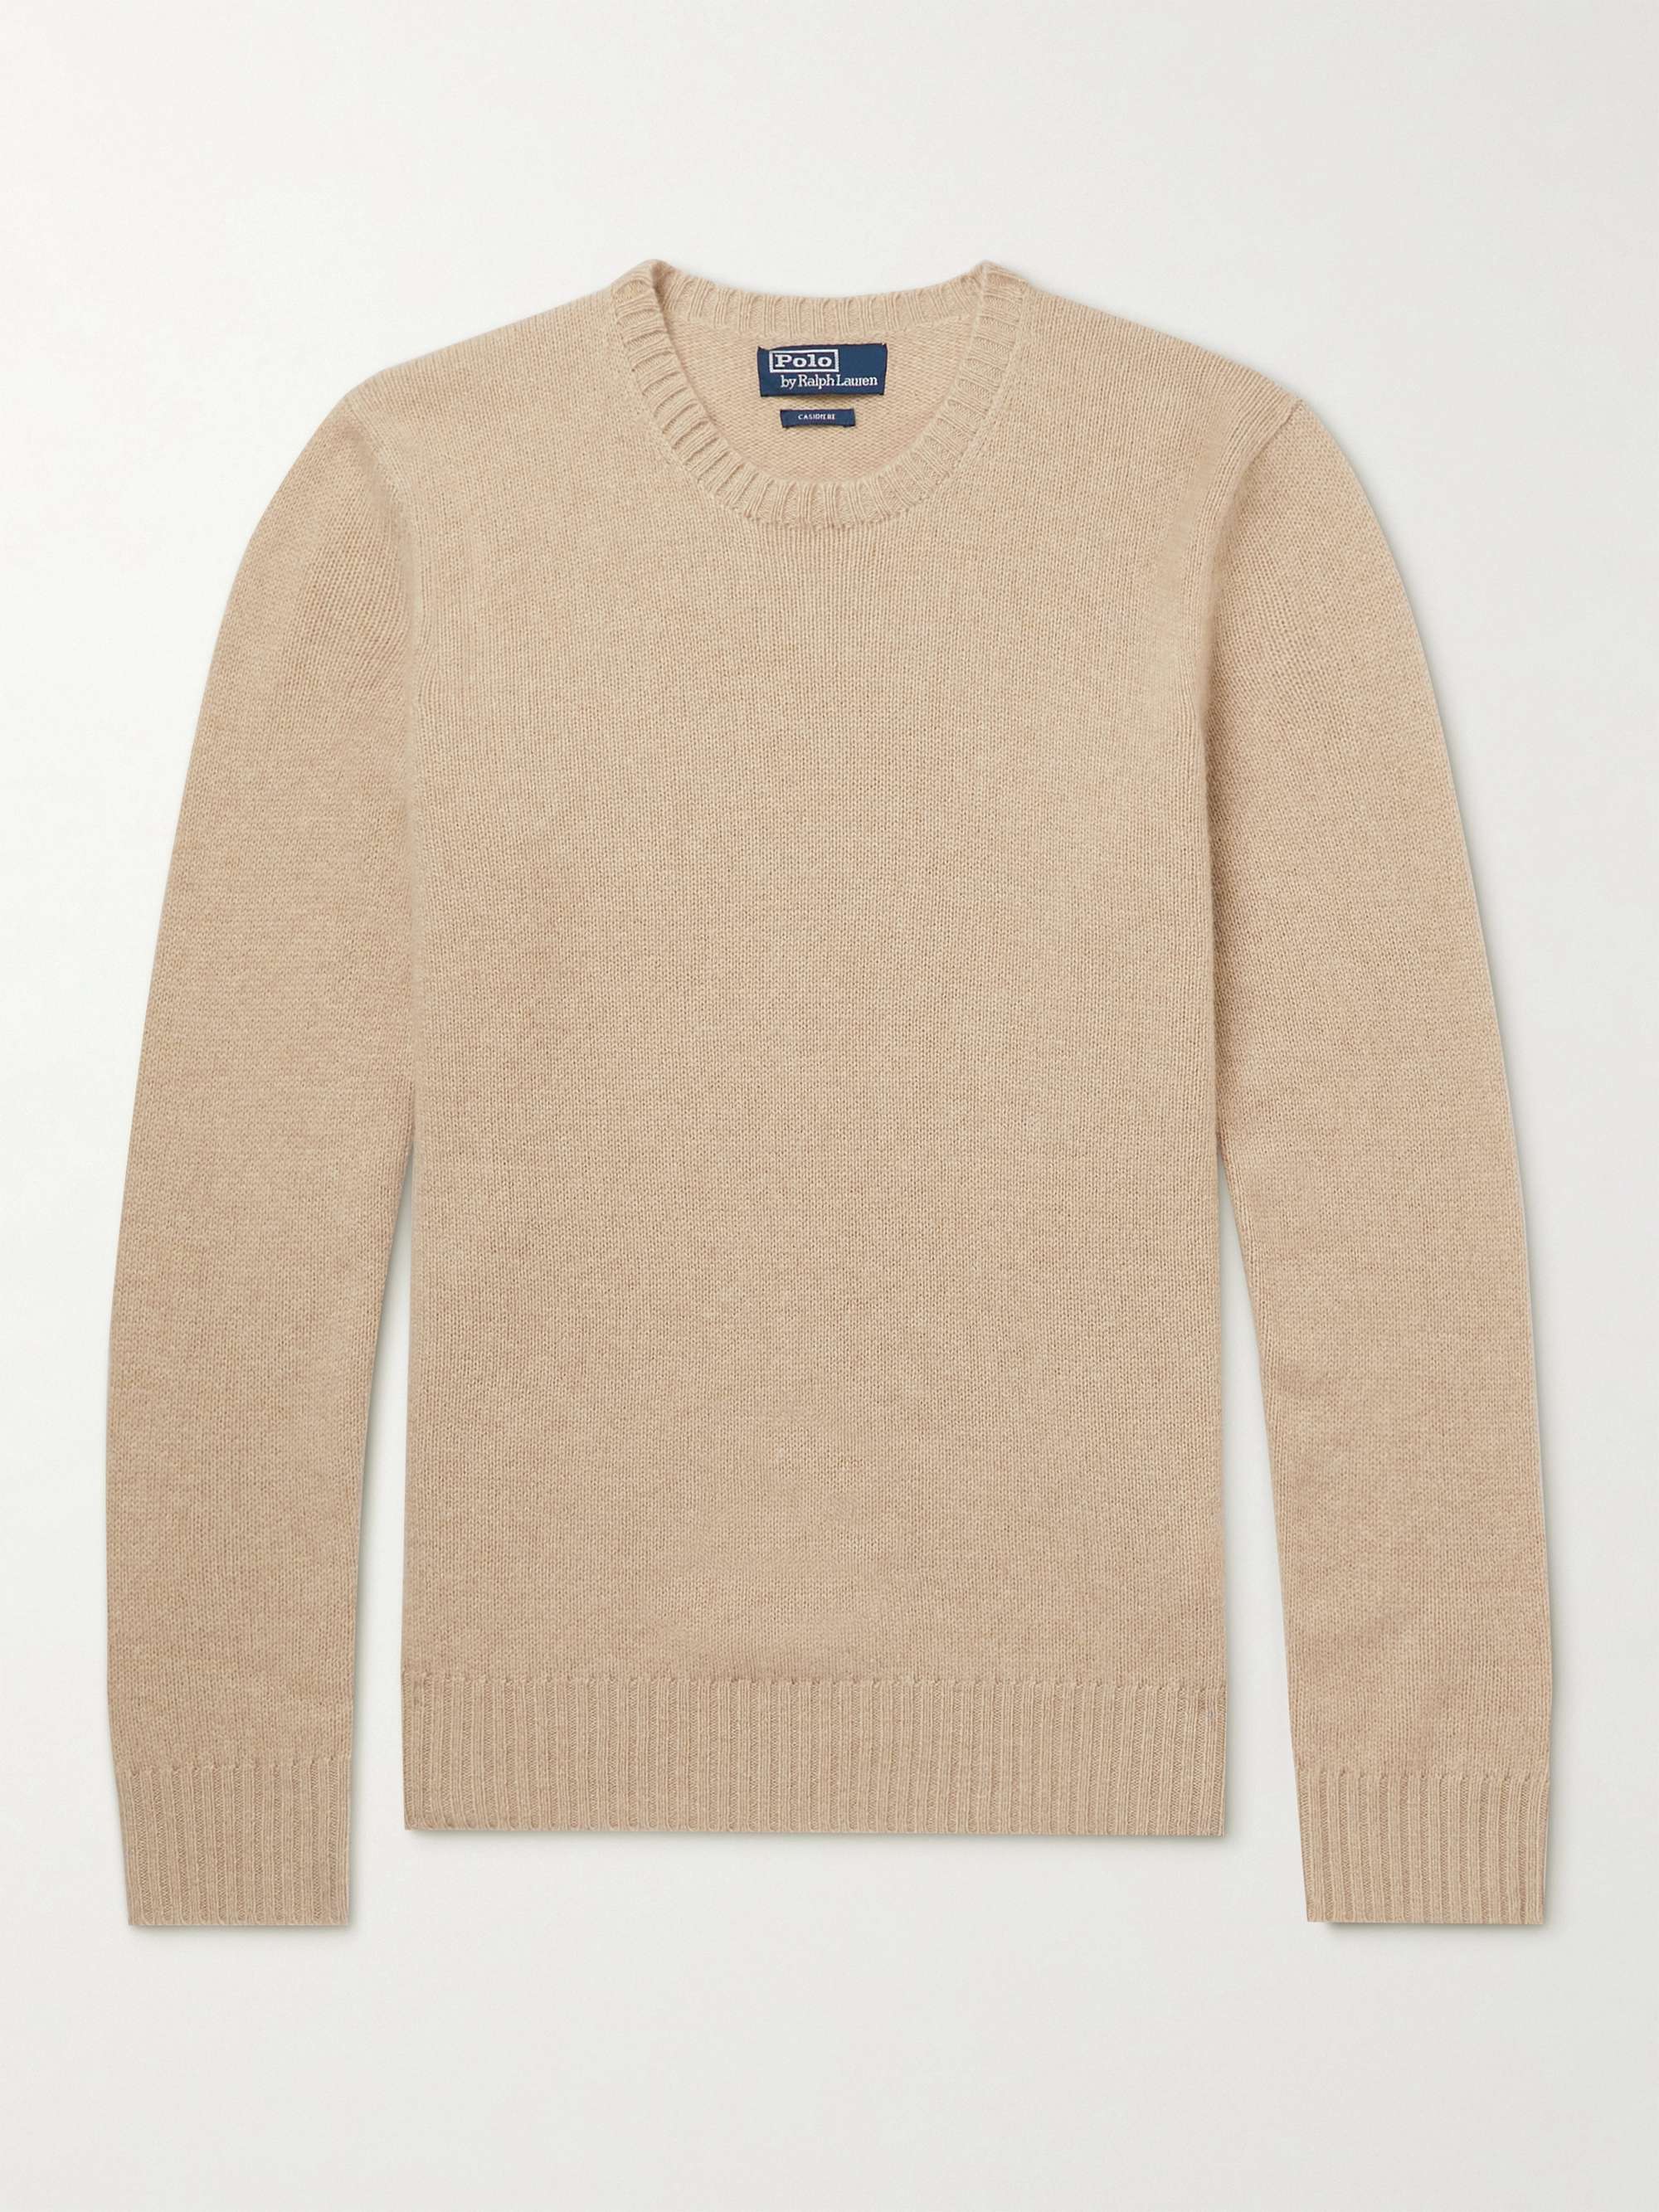 for Men Polo Ralph Lauren Ivory Wool Ble in Beige White Mens Sweaters and knitwear Polo Ralph Lauren Sweaters and knitwear 